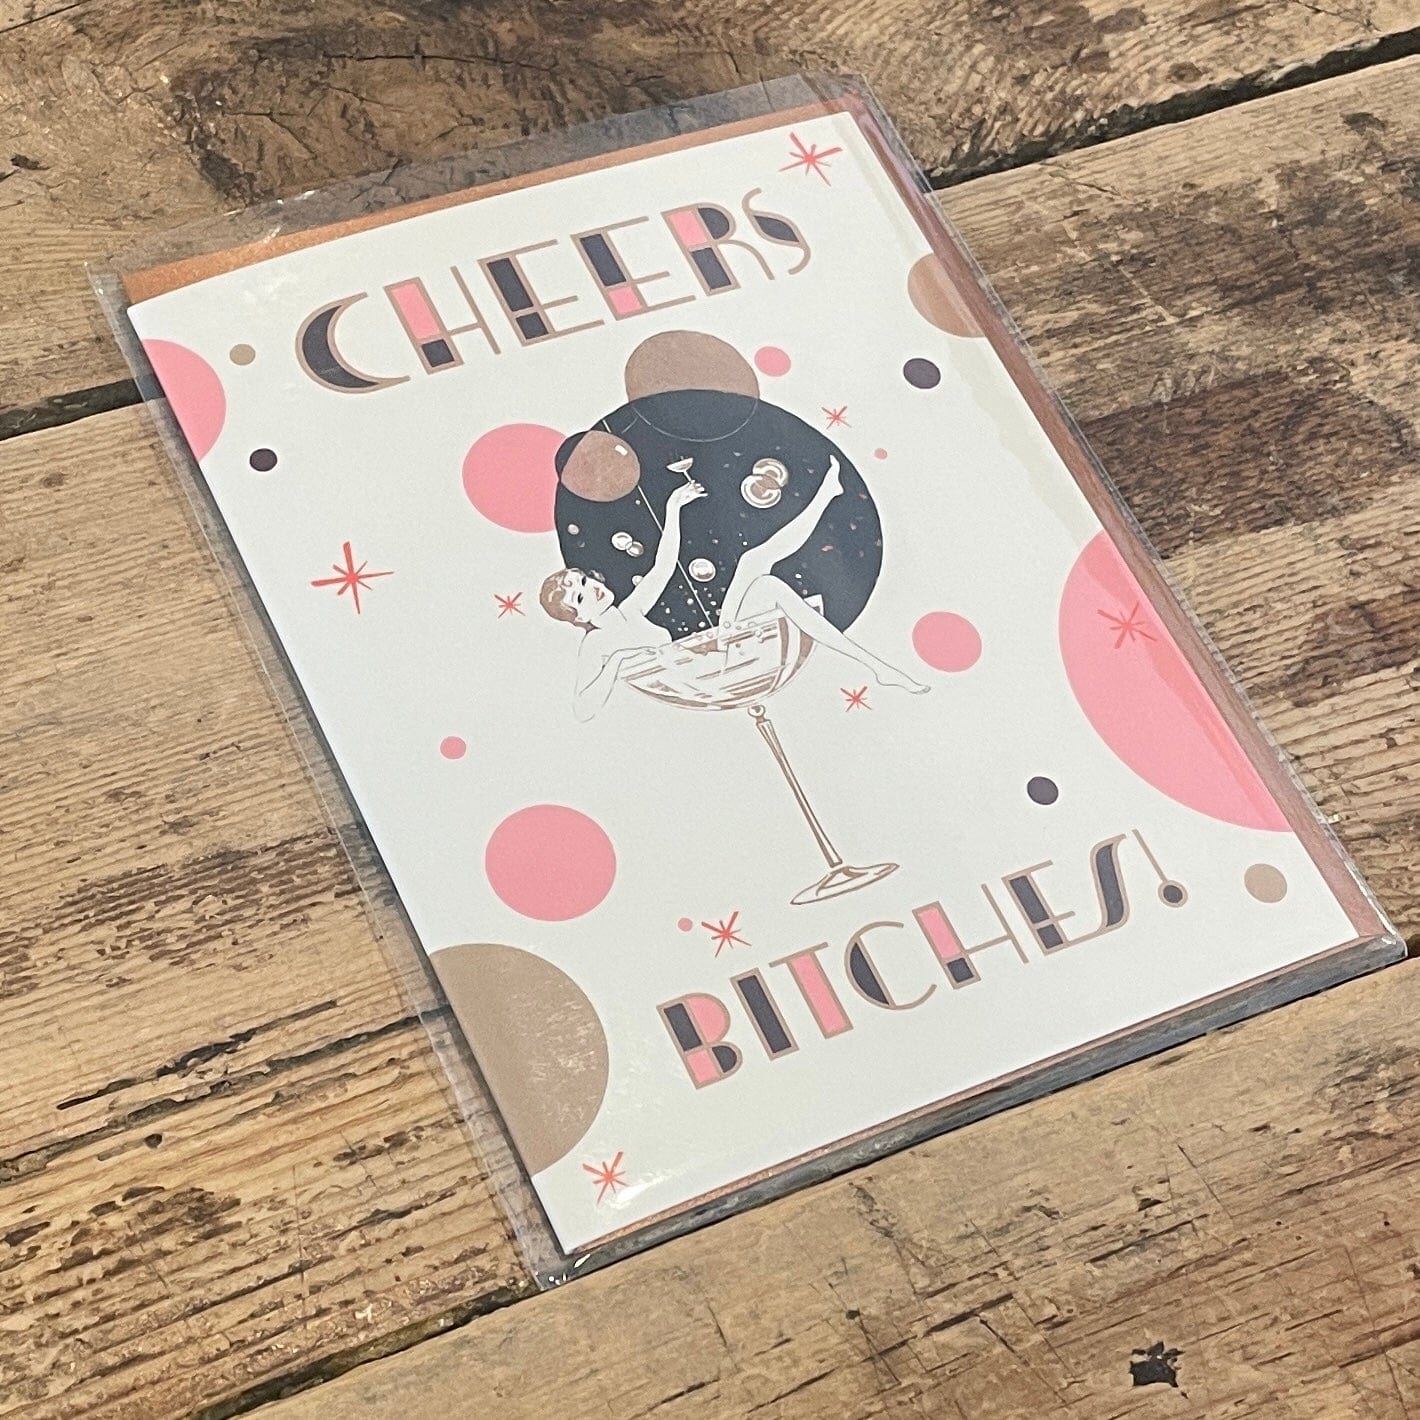 Cheers Bitches Offensive Delightful Greeting Card - PORCH